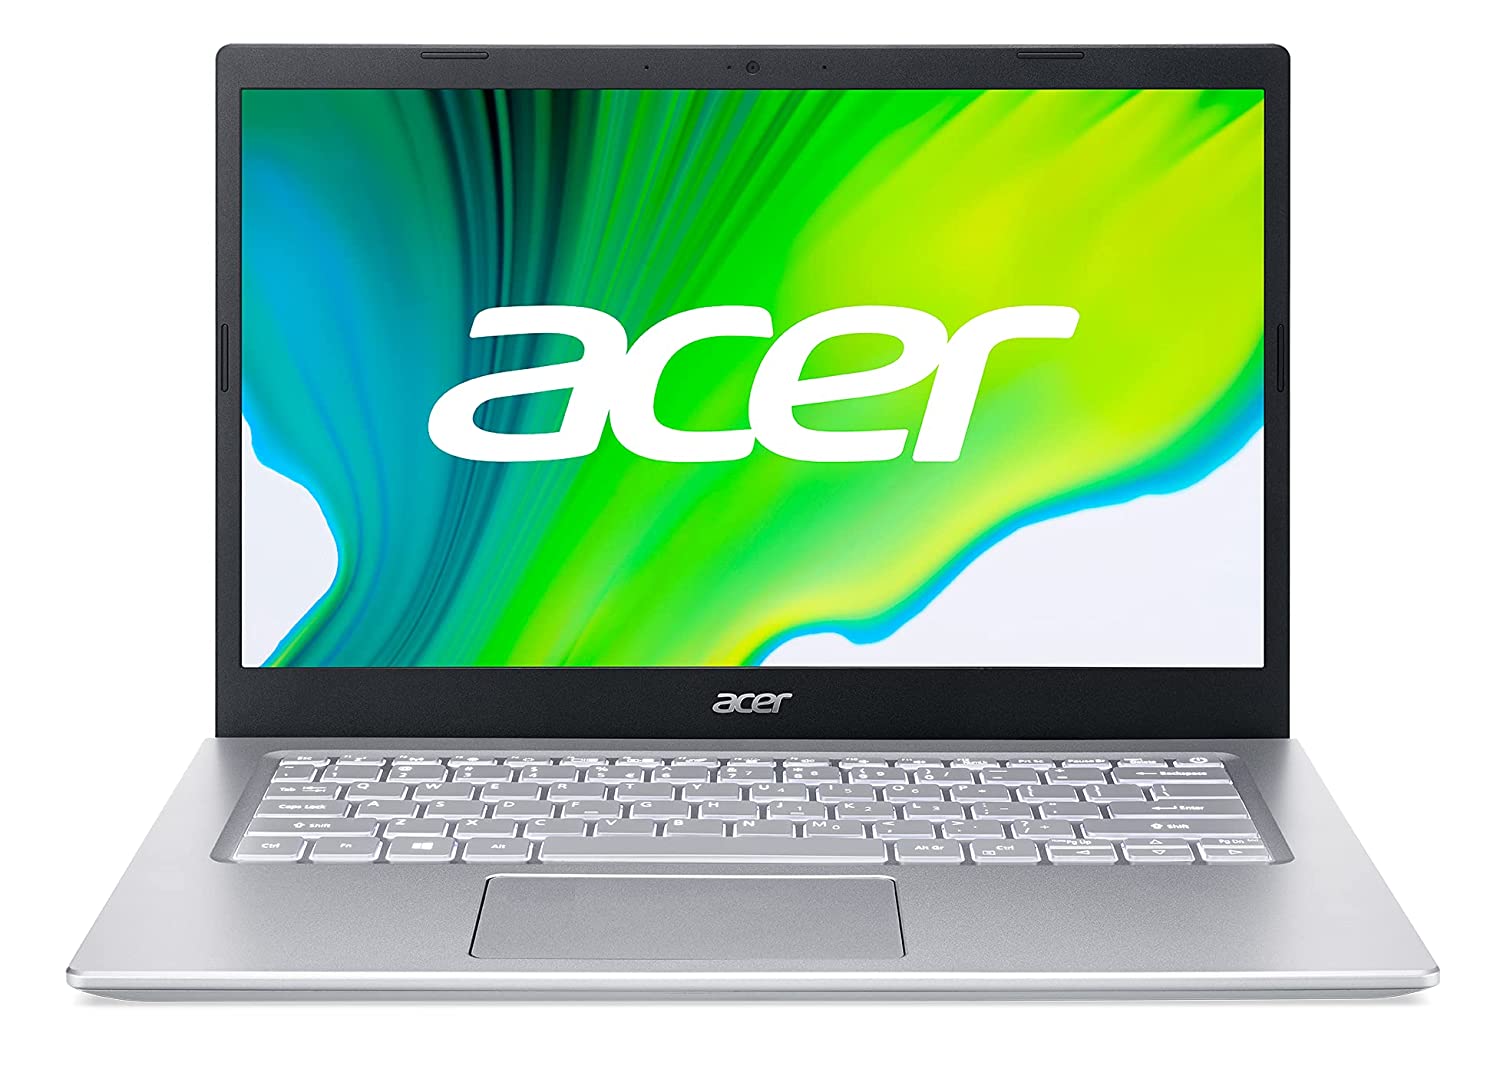 Amazon Festival Sale: Don't miss this laptop deal, more than 20 thousand off on Acer Aspire 14 inch laptop directly